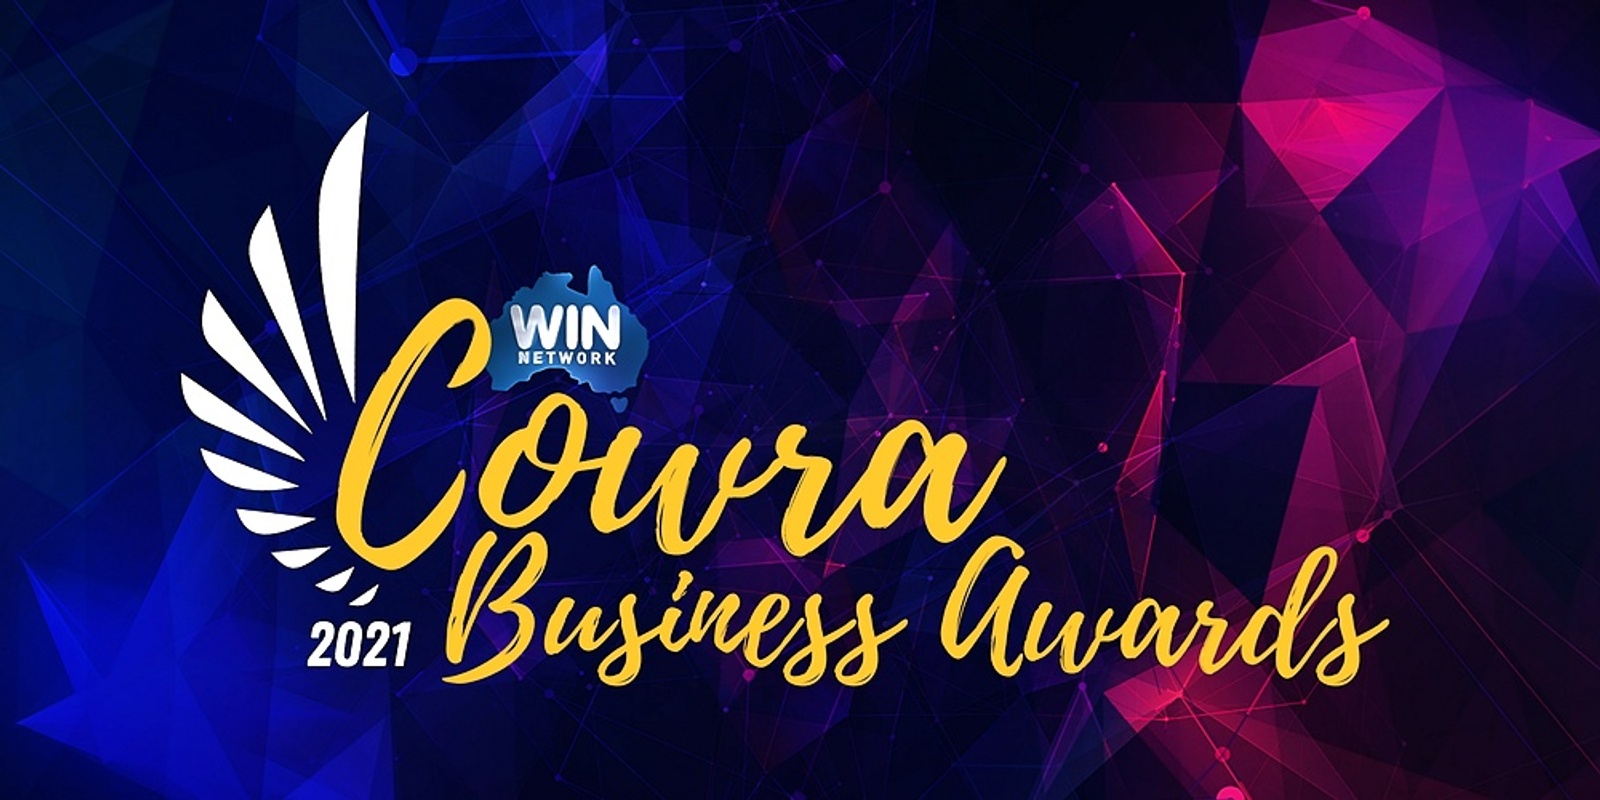 Banner image for 2021 Cowra Business Awards